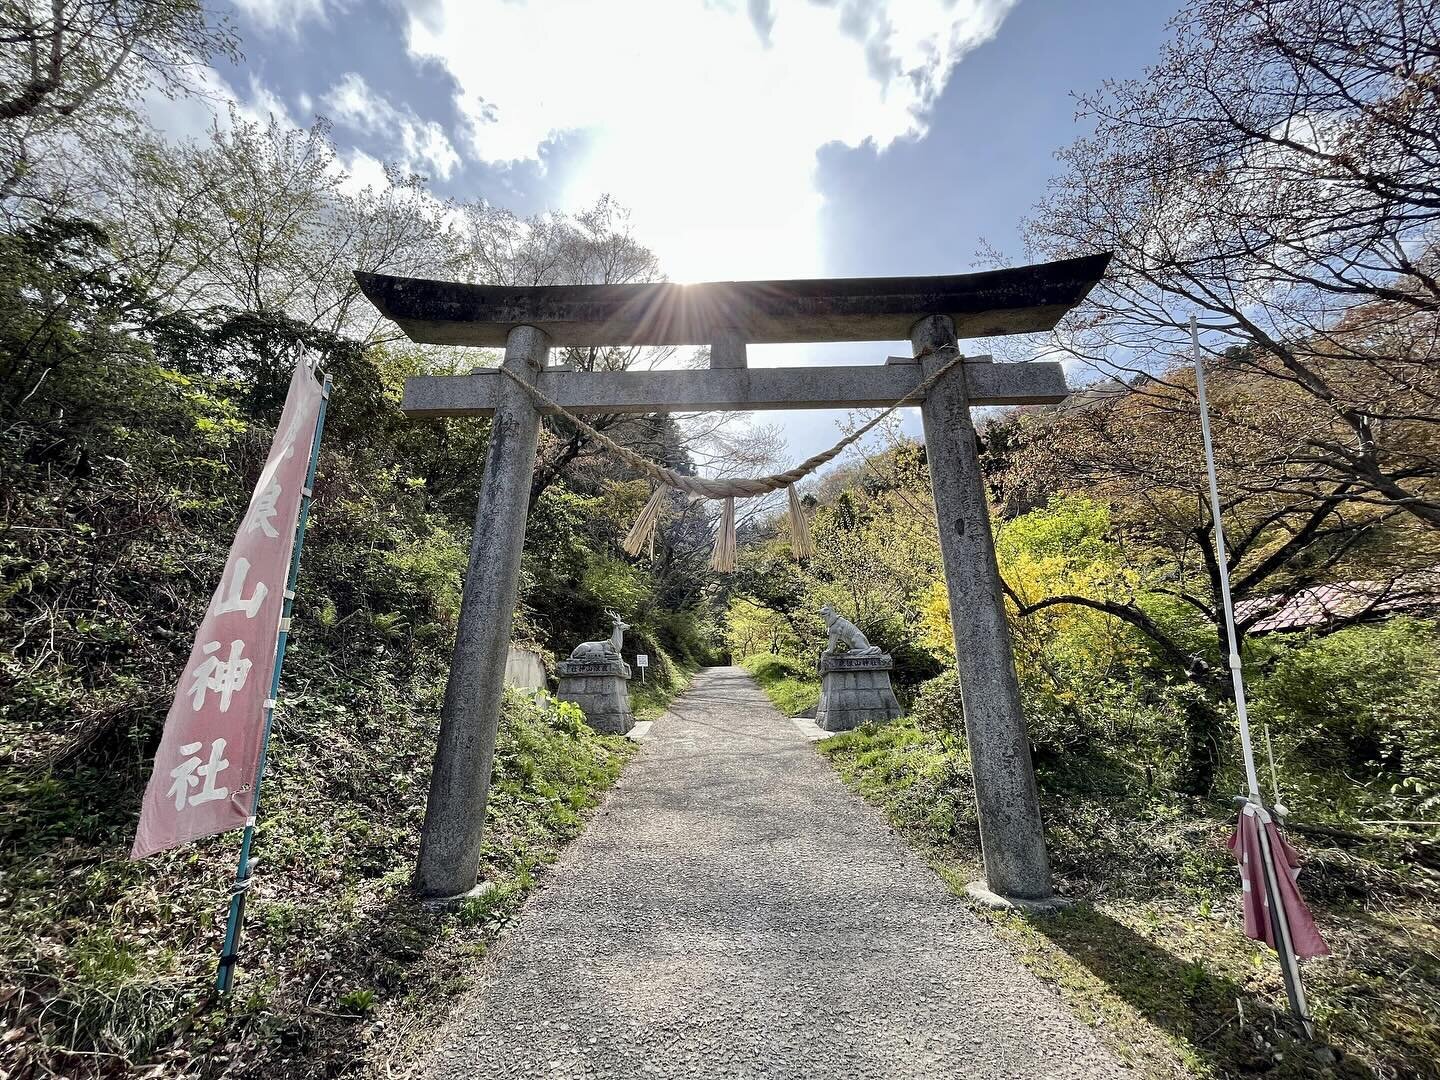 New hiking guide for Mt. Karou in Fukushima, along the #MichinokuCoastalTrail! ⛩️

Mount Karou（#鹿狼山）is an accessible and popular hike near the town of Shinchi in northern Fukushima.

On a clear day, visitors can enjoy views of the Pacific Ocean, the 